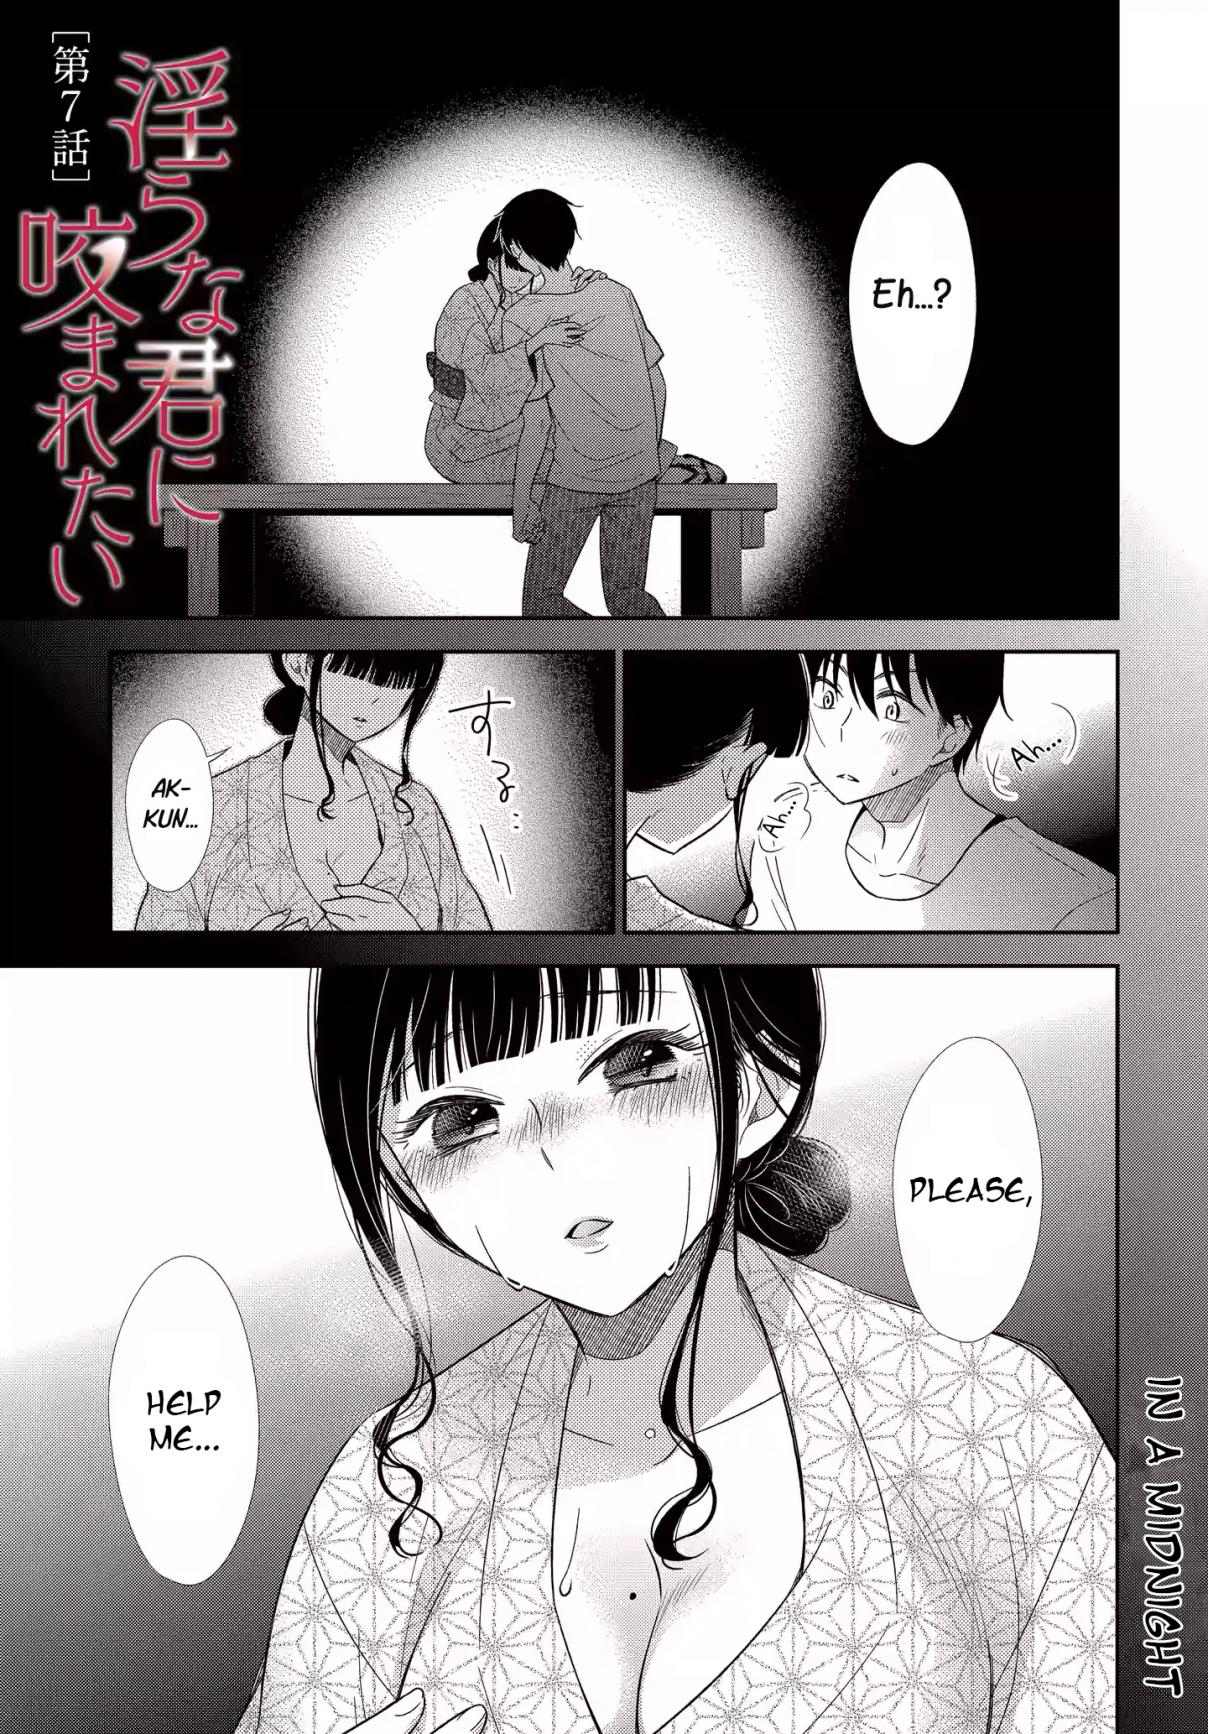 Bite Into Me Vol. 1 Ch. 7 The End of a Meeting